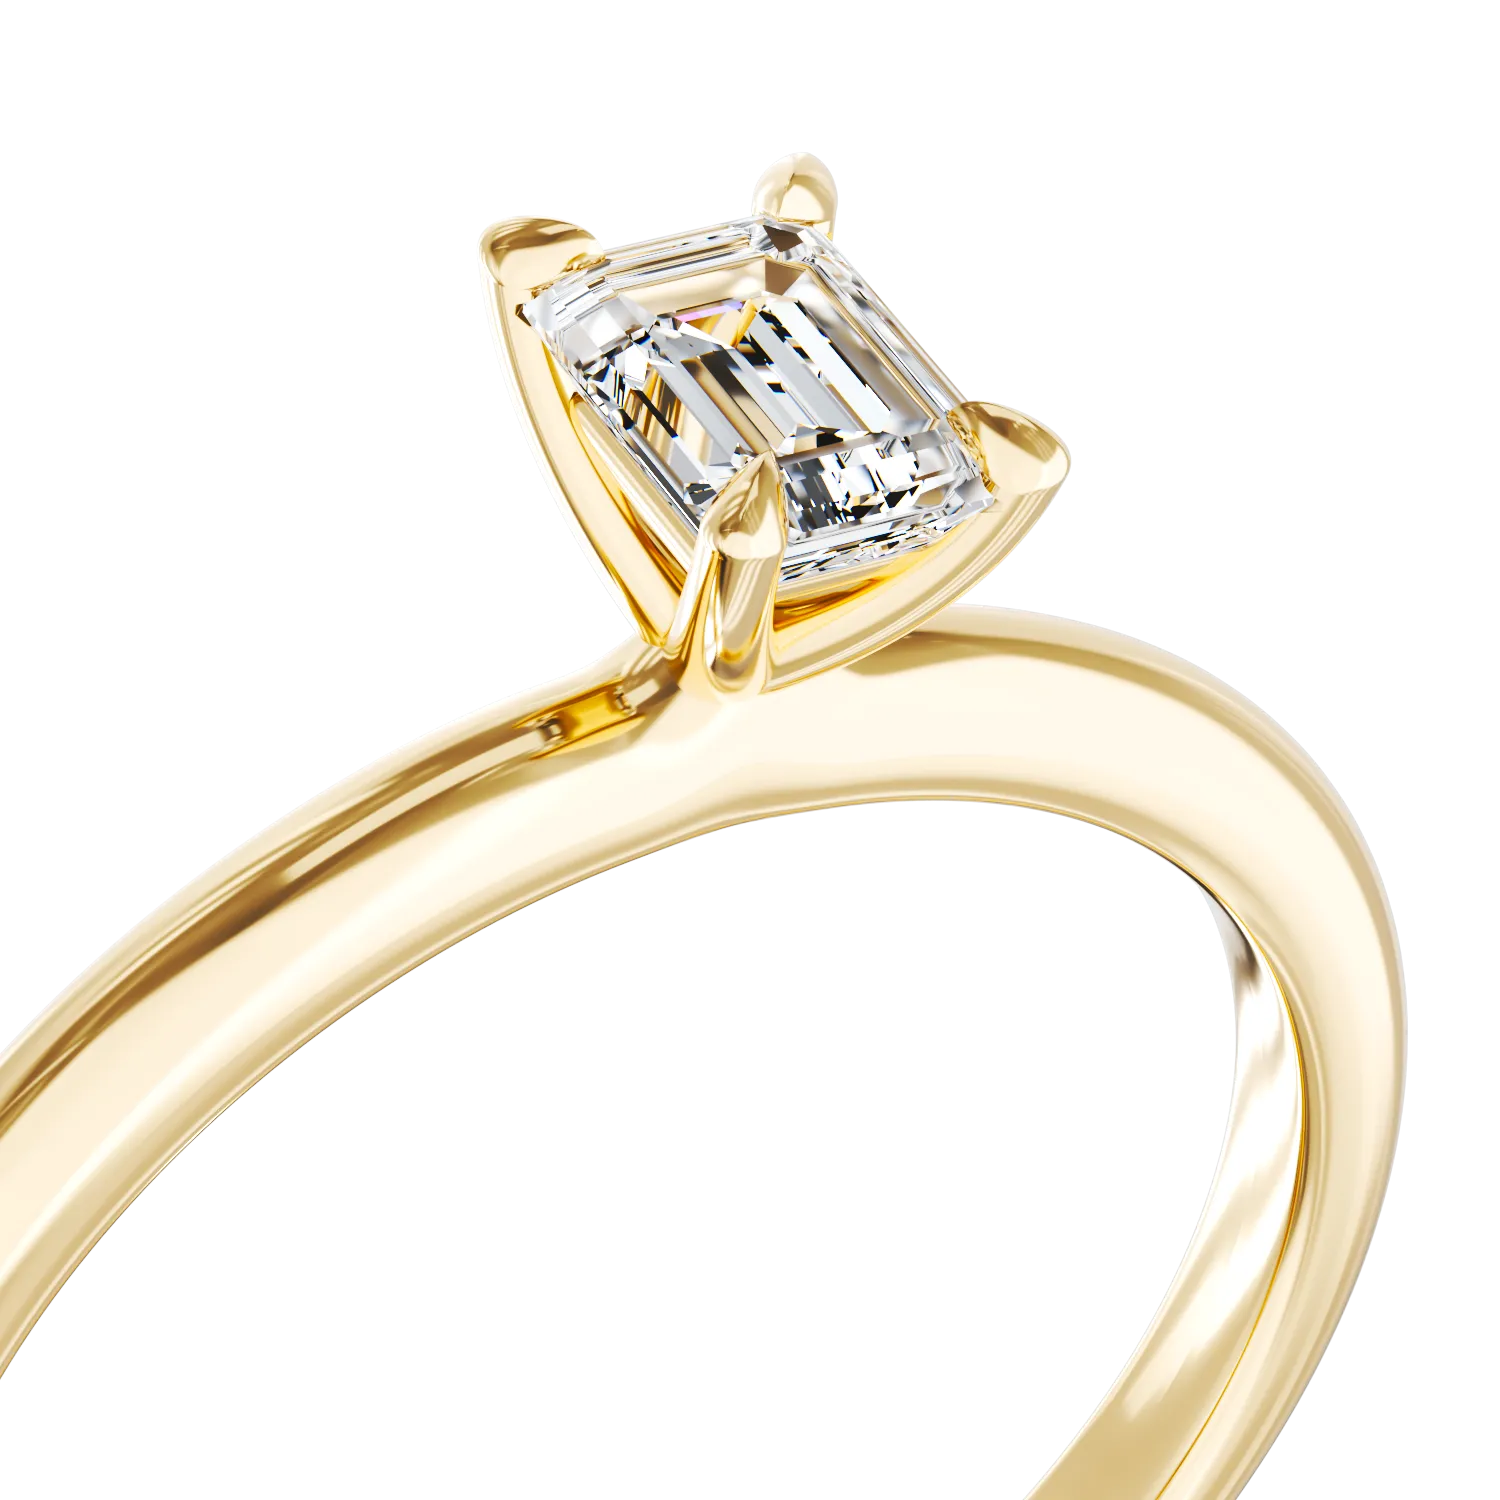 18k yellow gold engagement ring with a 0.4ct solitary diamond